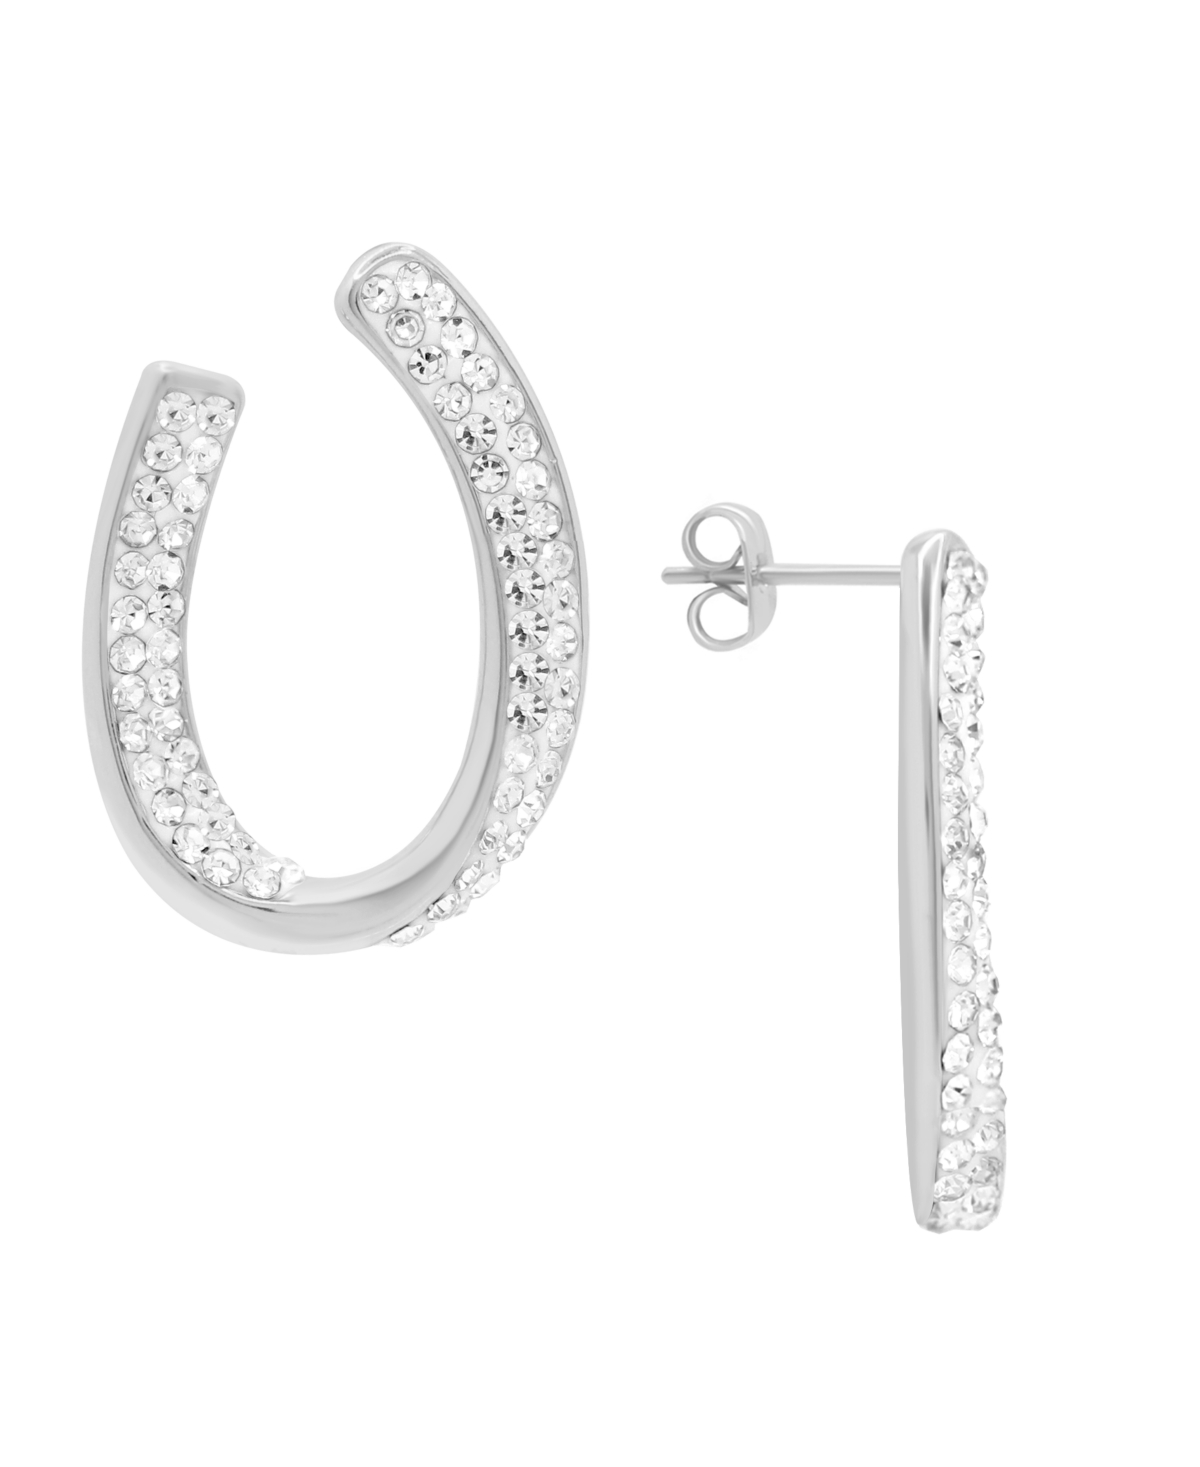 Crystal Curved Post Earring, Gold Plate and Silver Plate - Gold-Tone